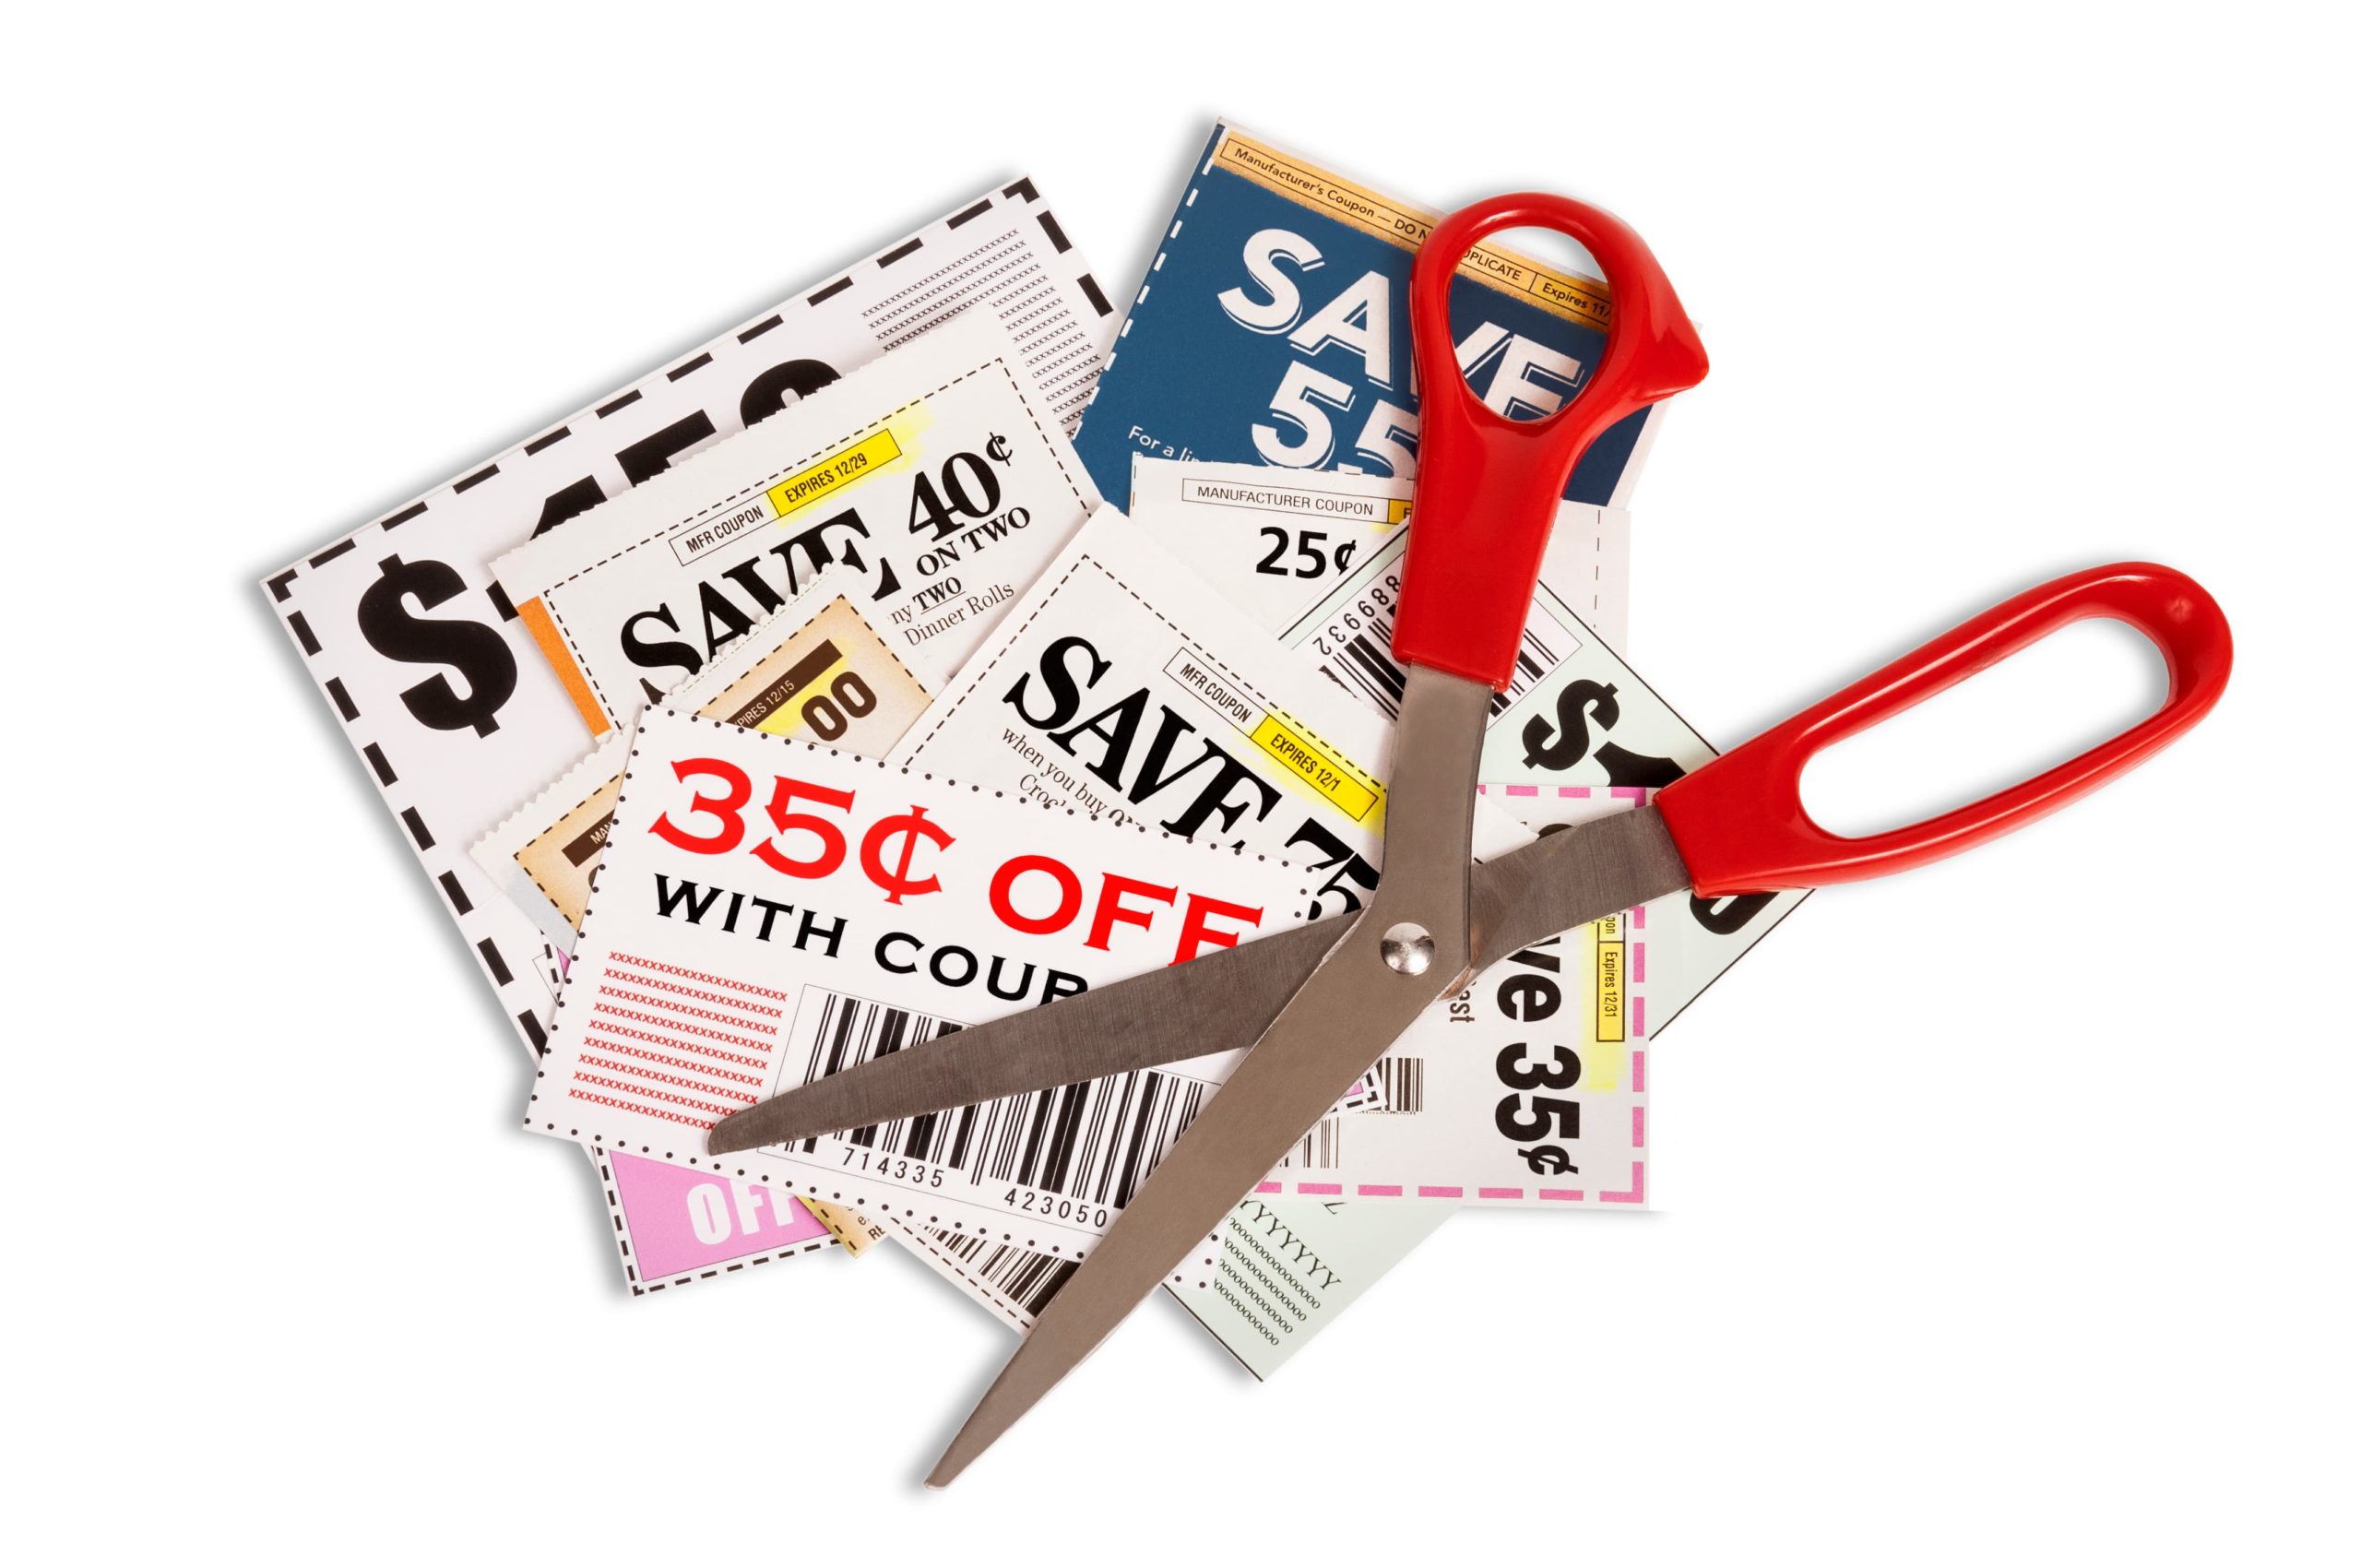 Thrifty grocery coupons